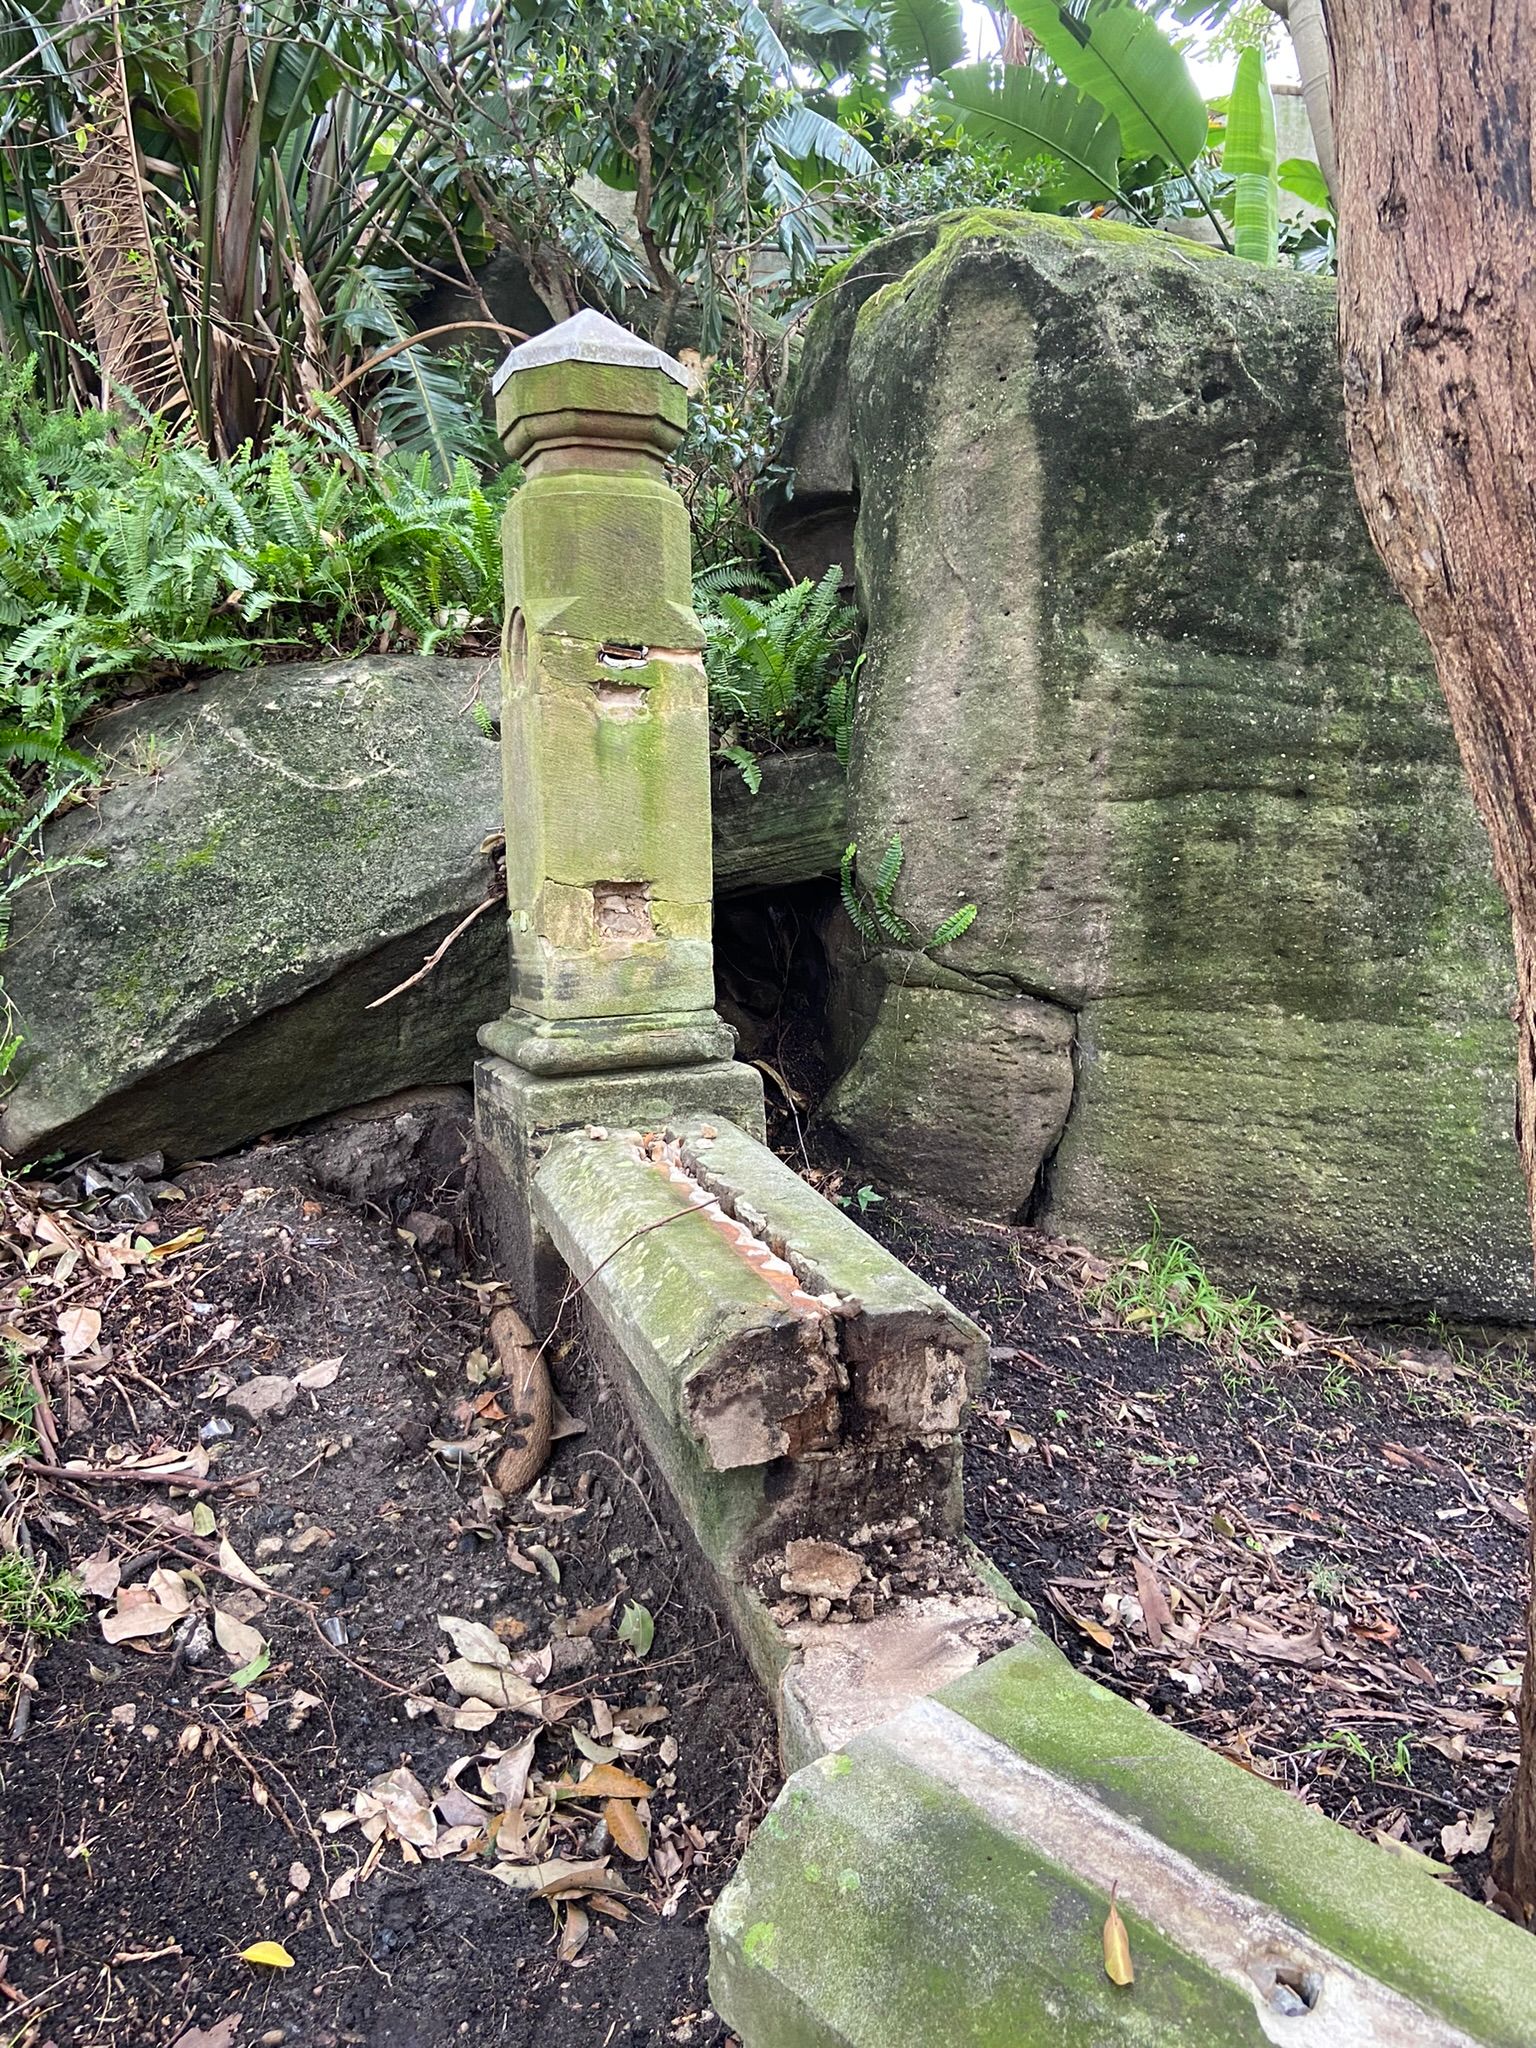 Badly damaged sandstone with green moss